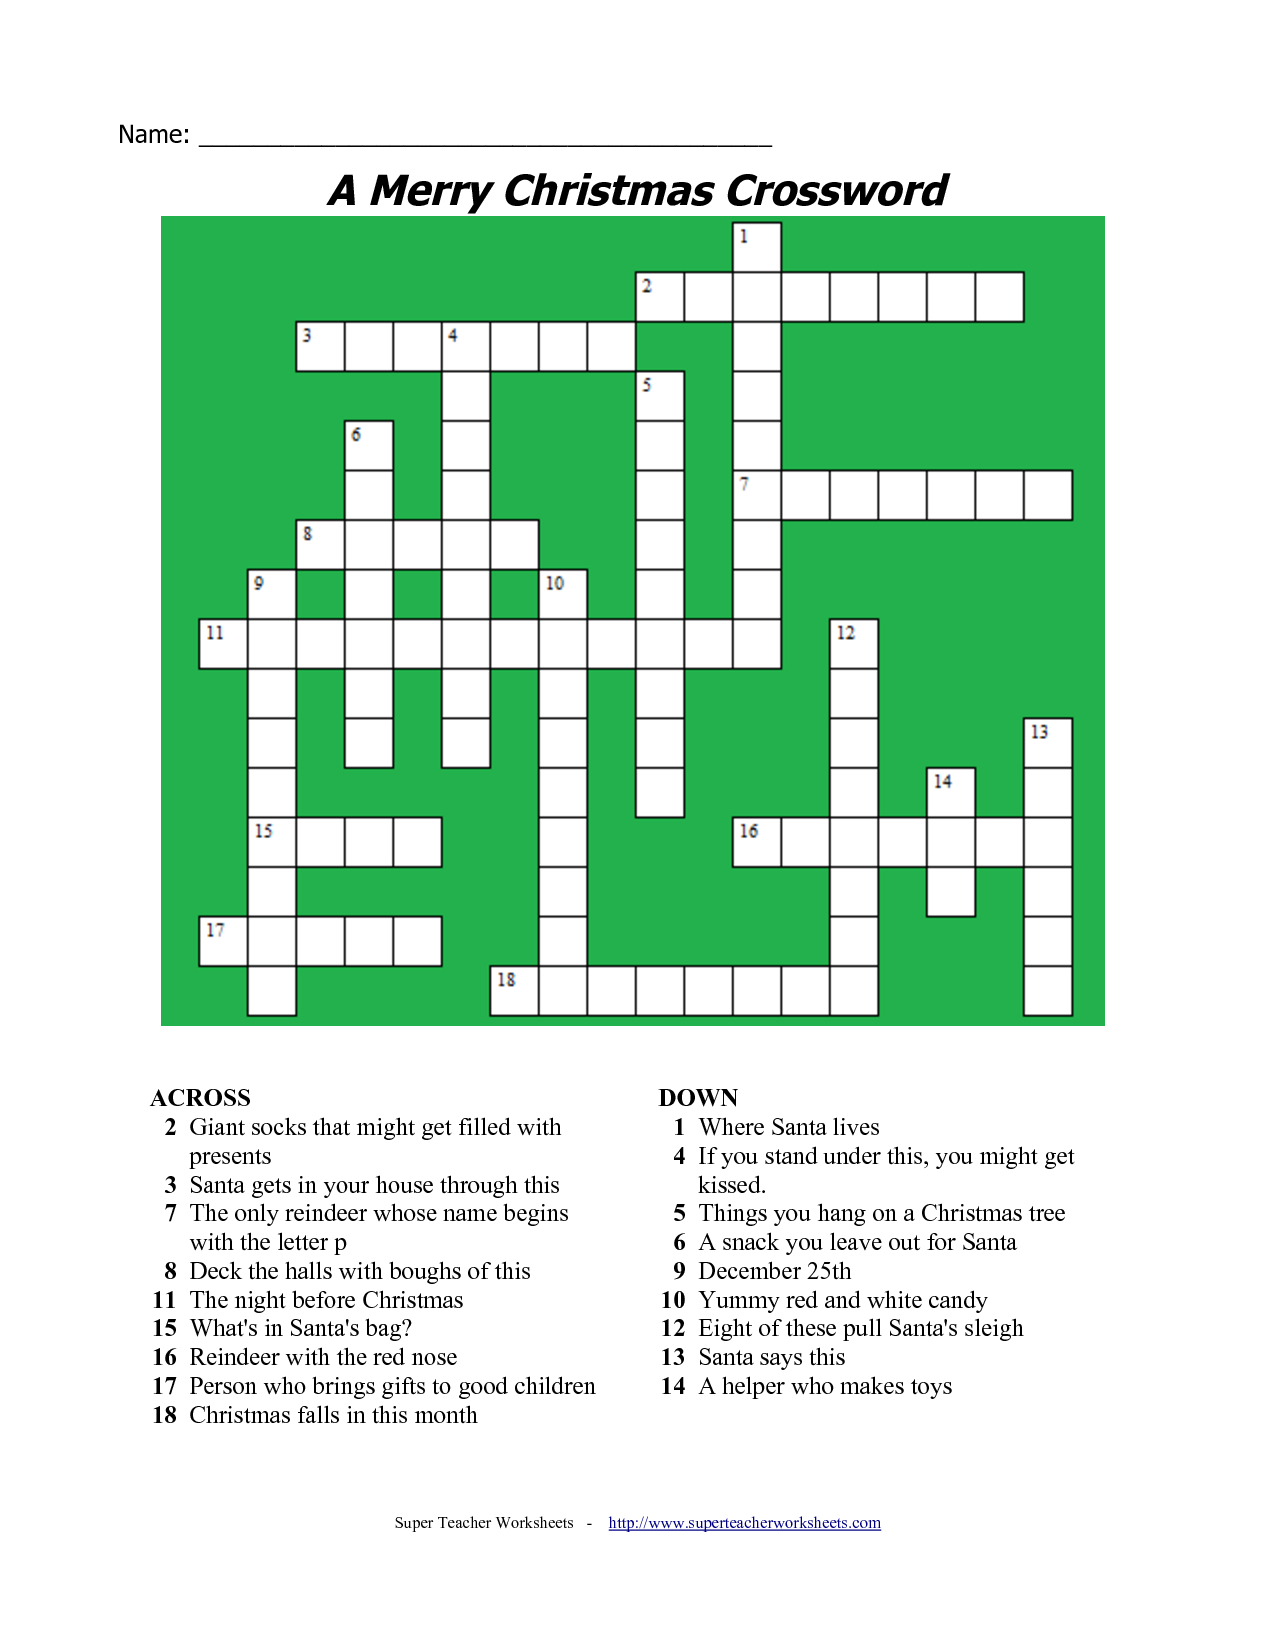 Simple English Crossword Puzzles With Answers - Quick Easy Bookmark Crossword Clue